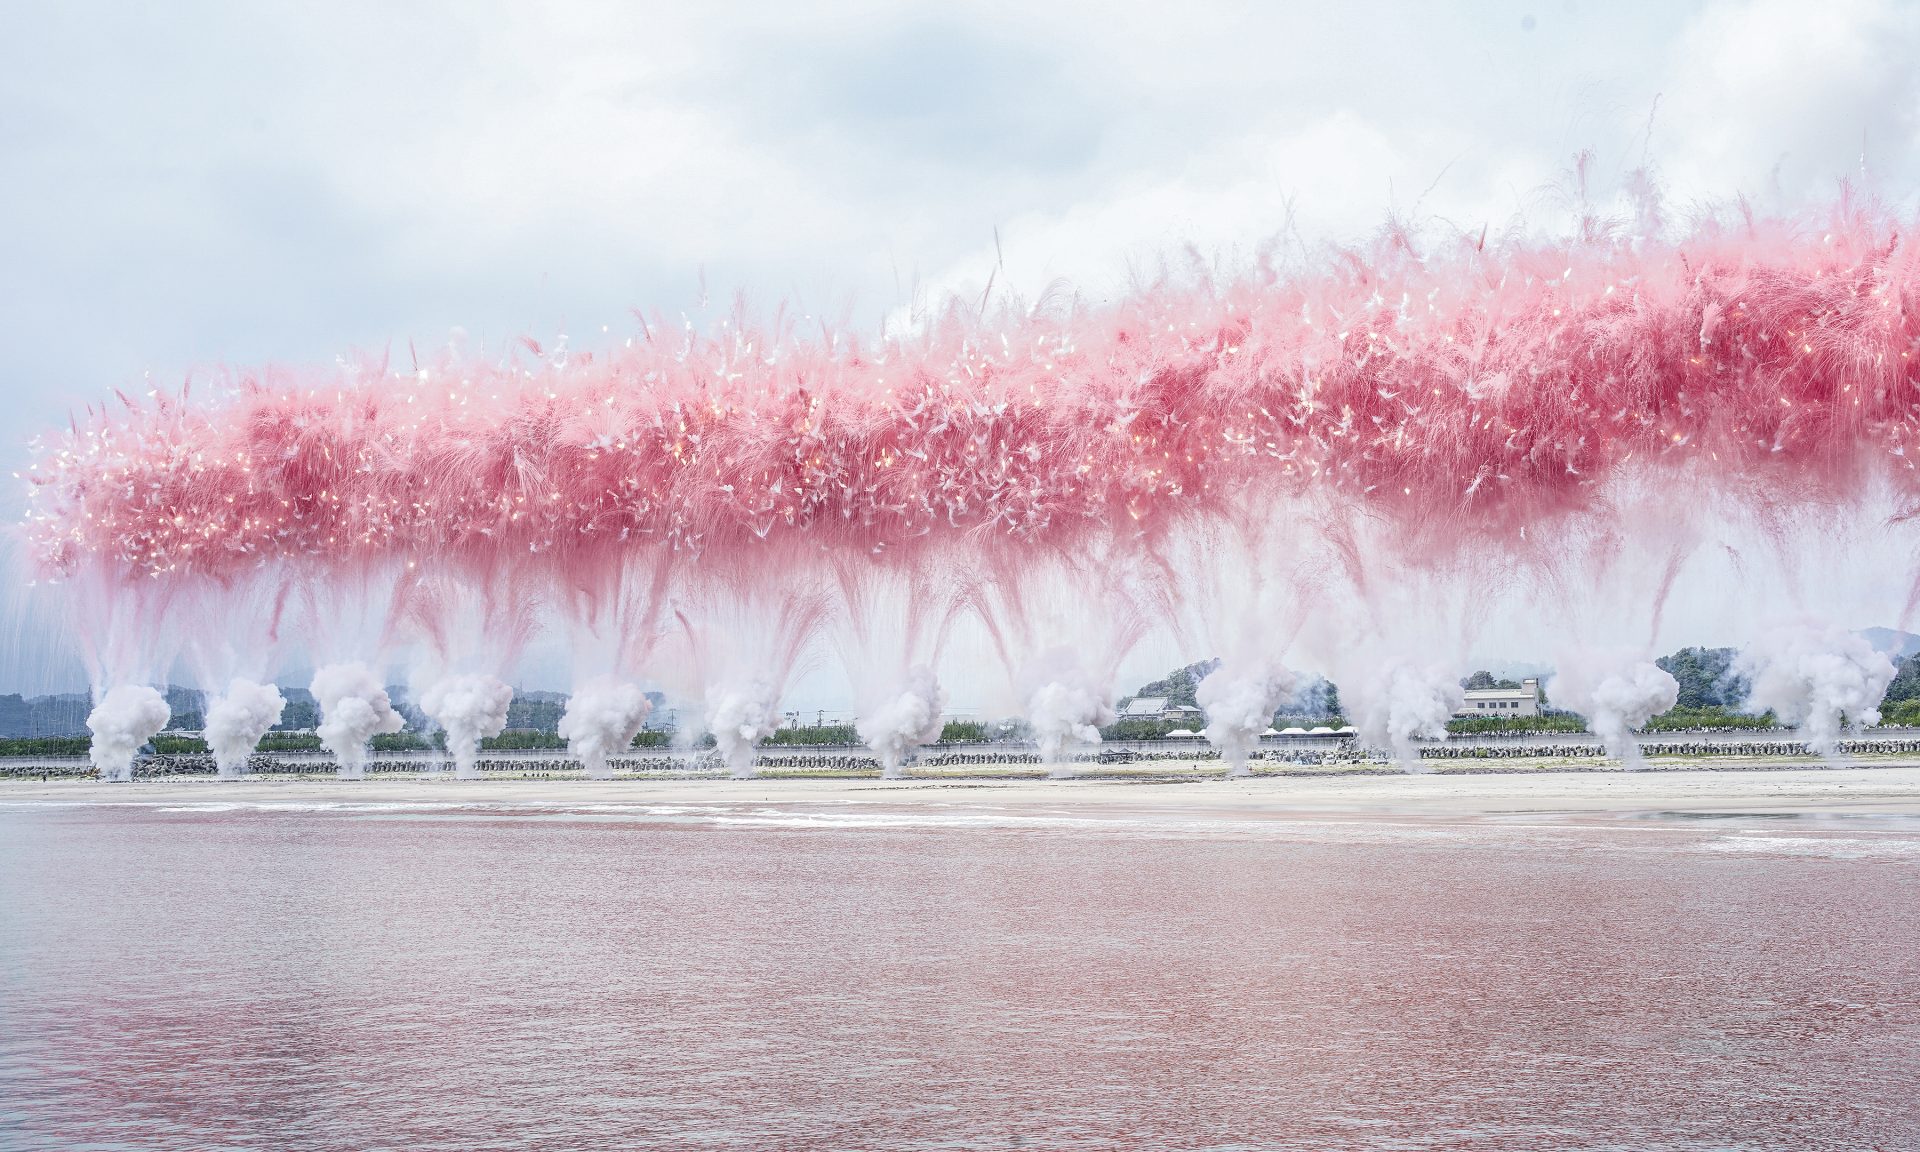 A ‘Fight Between Control and Utter Freedom’: Artist Cai Guo-Qiang ...